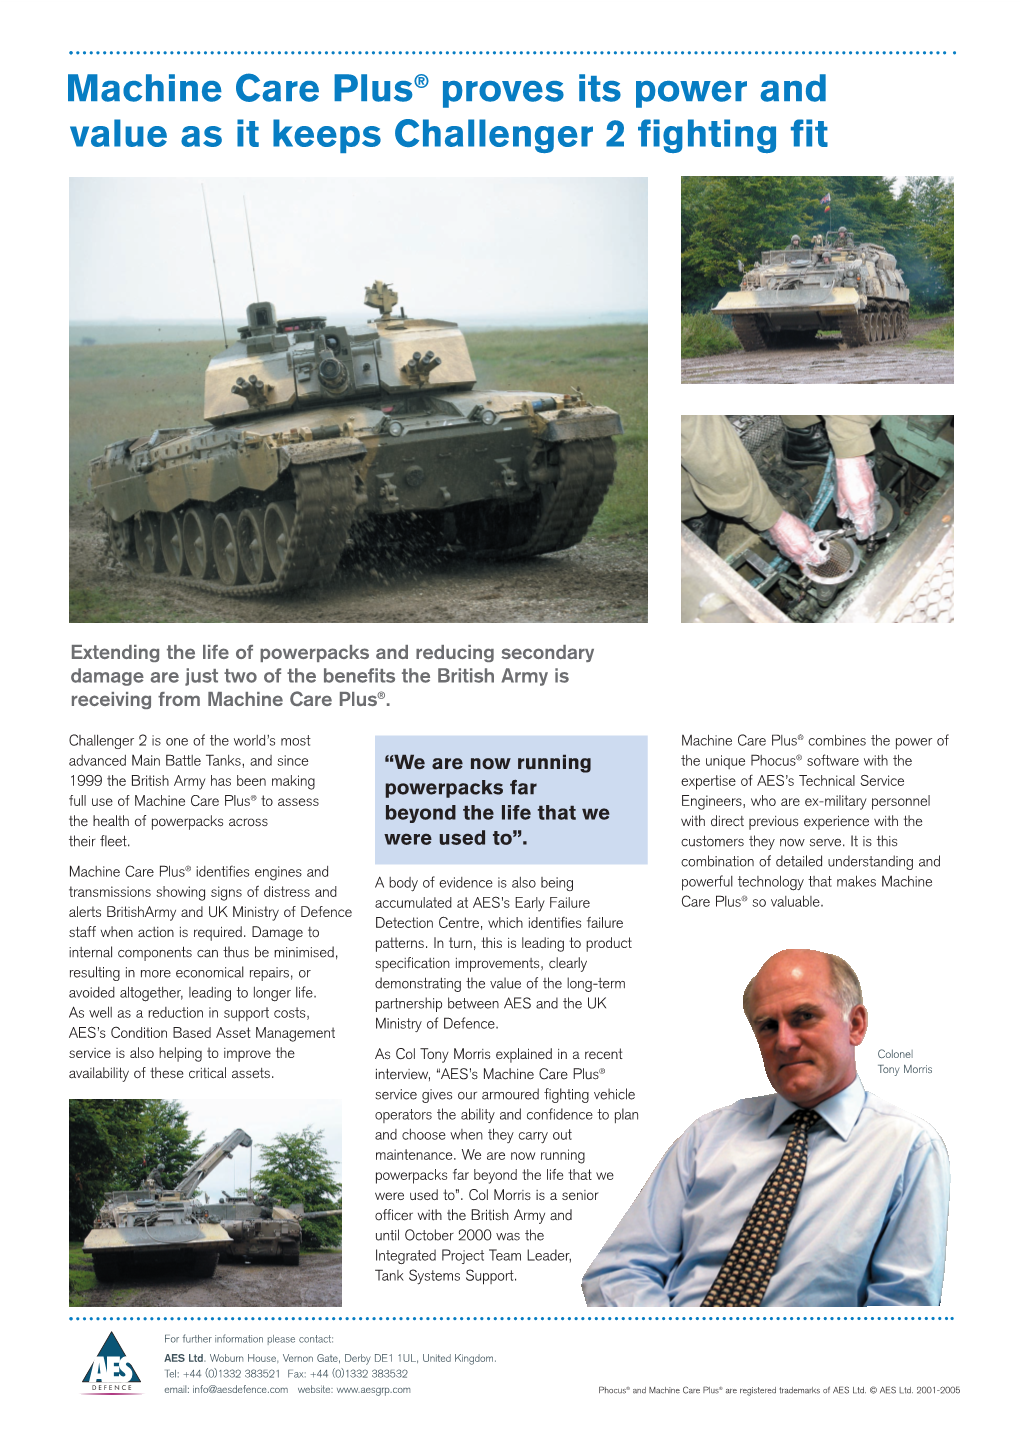 Machine Care Plus® Proves Its Power and Value As It Keeps Challenger 2 Fighting Fit